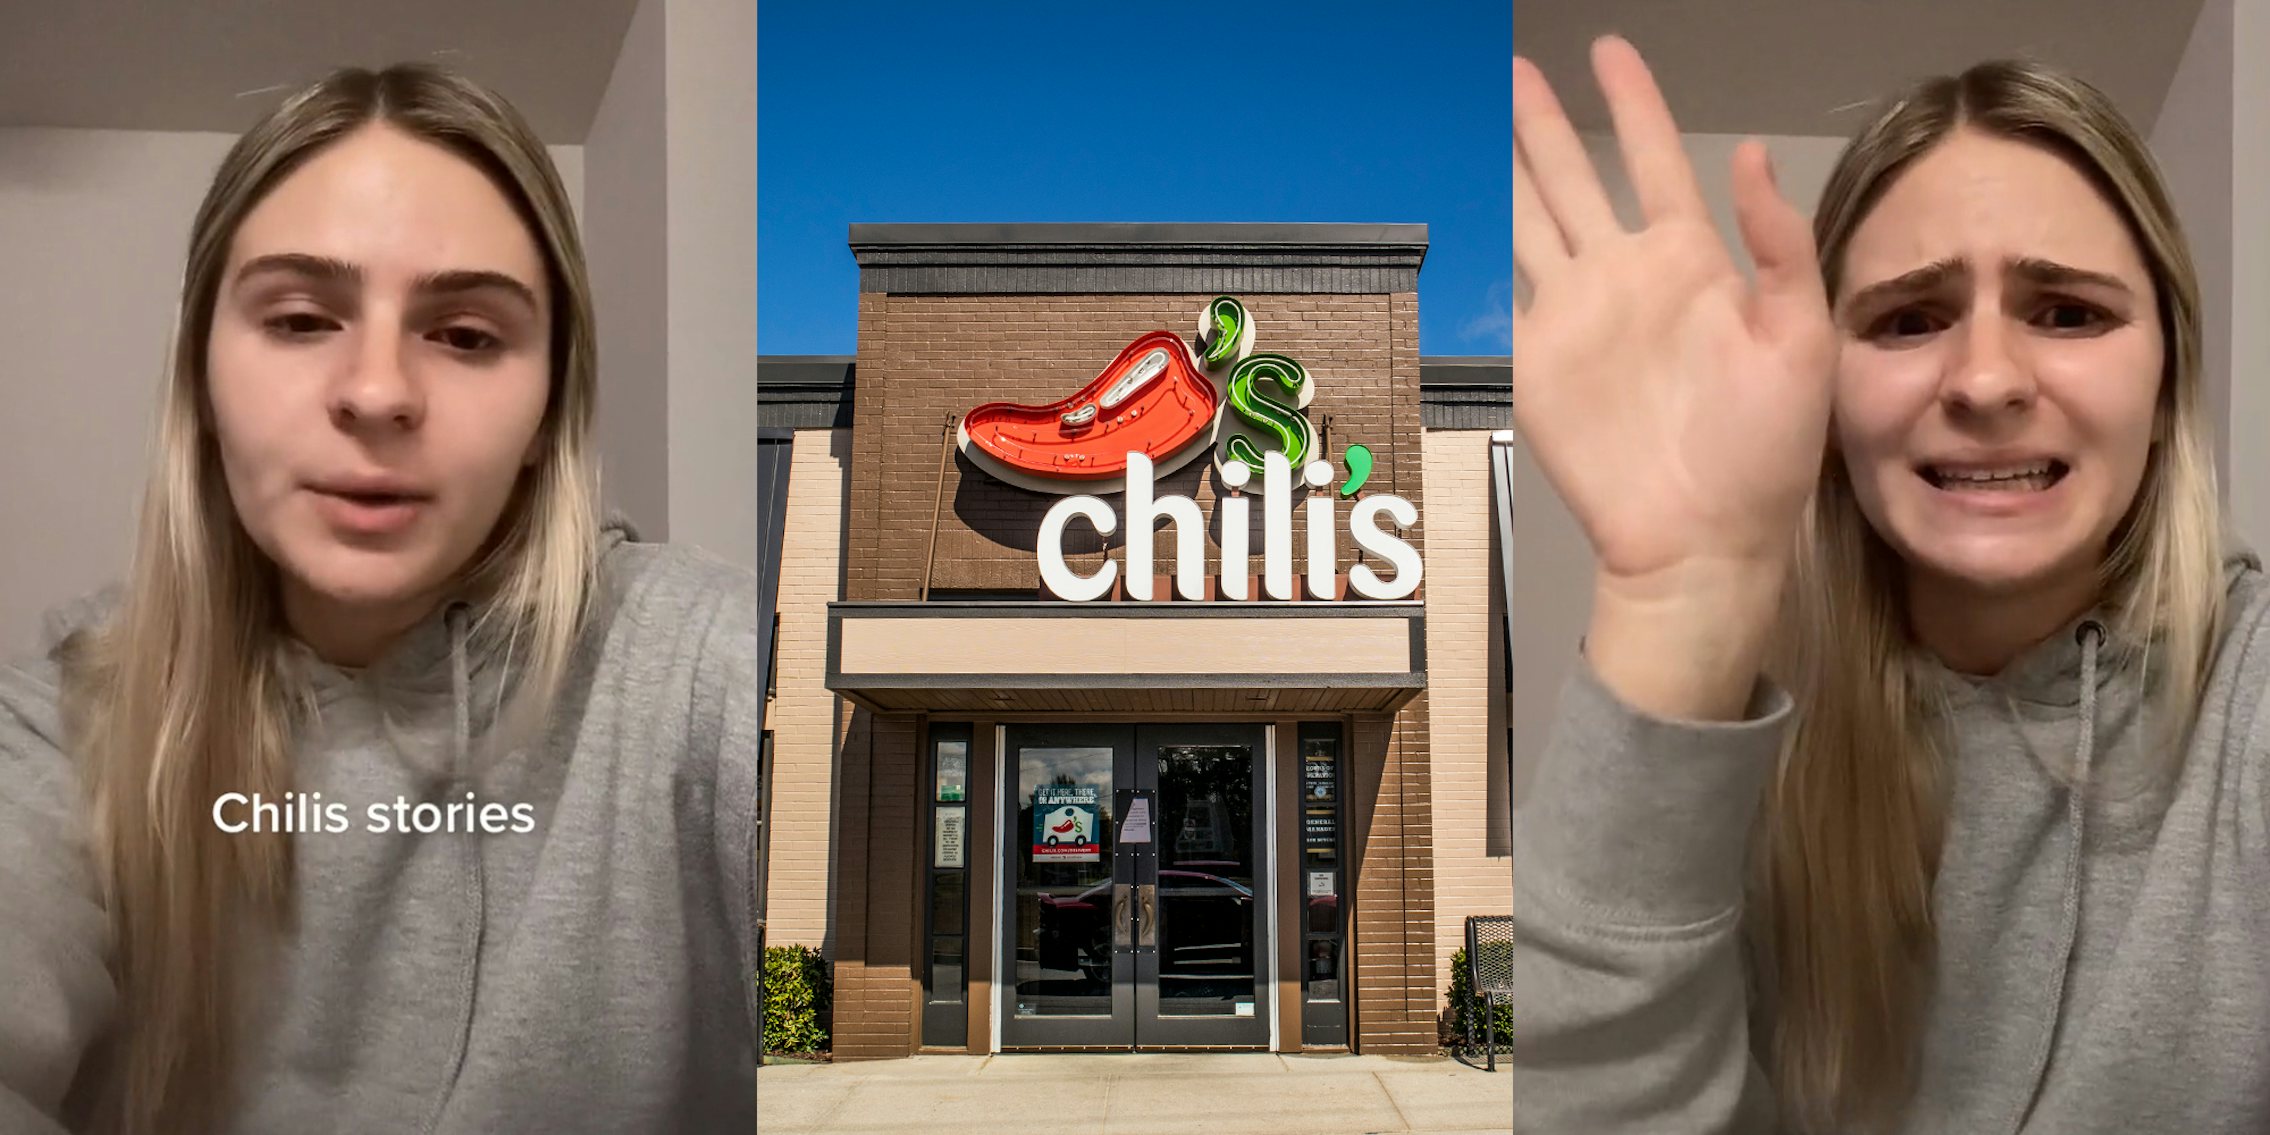 former Chili's employee speaking caption 'Chilis stories' (l) Chili's sign on building (c) former Chili's employee speaking with hand up (r)